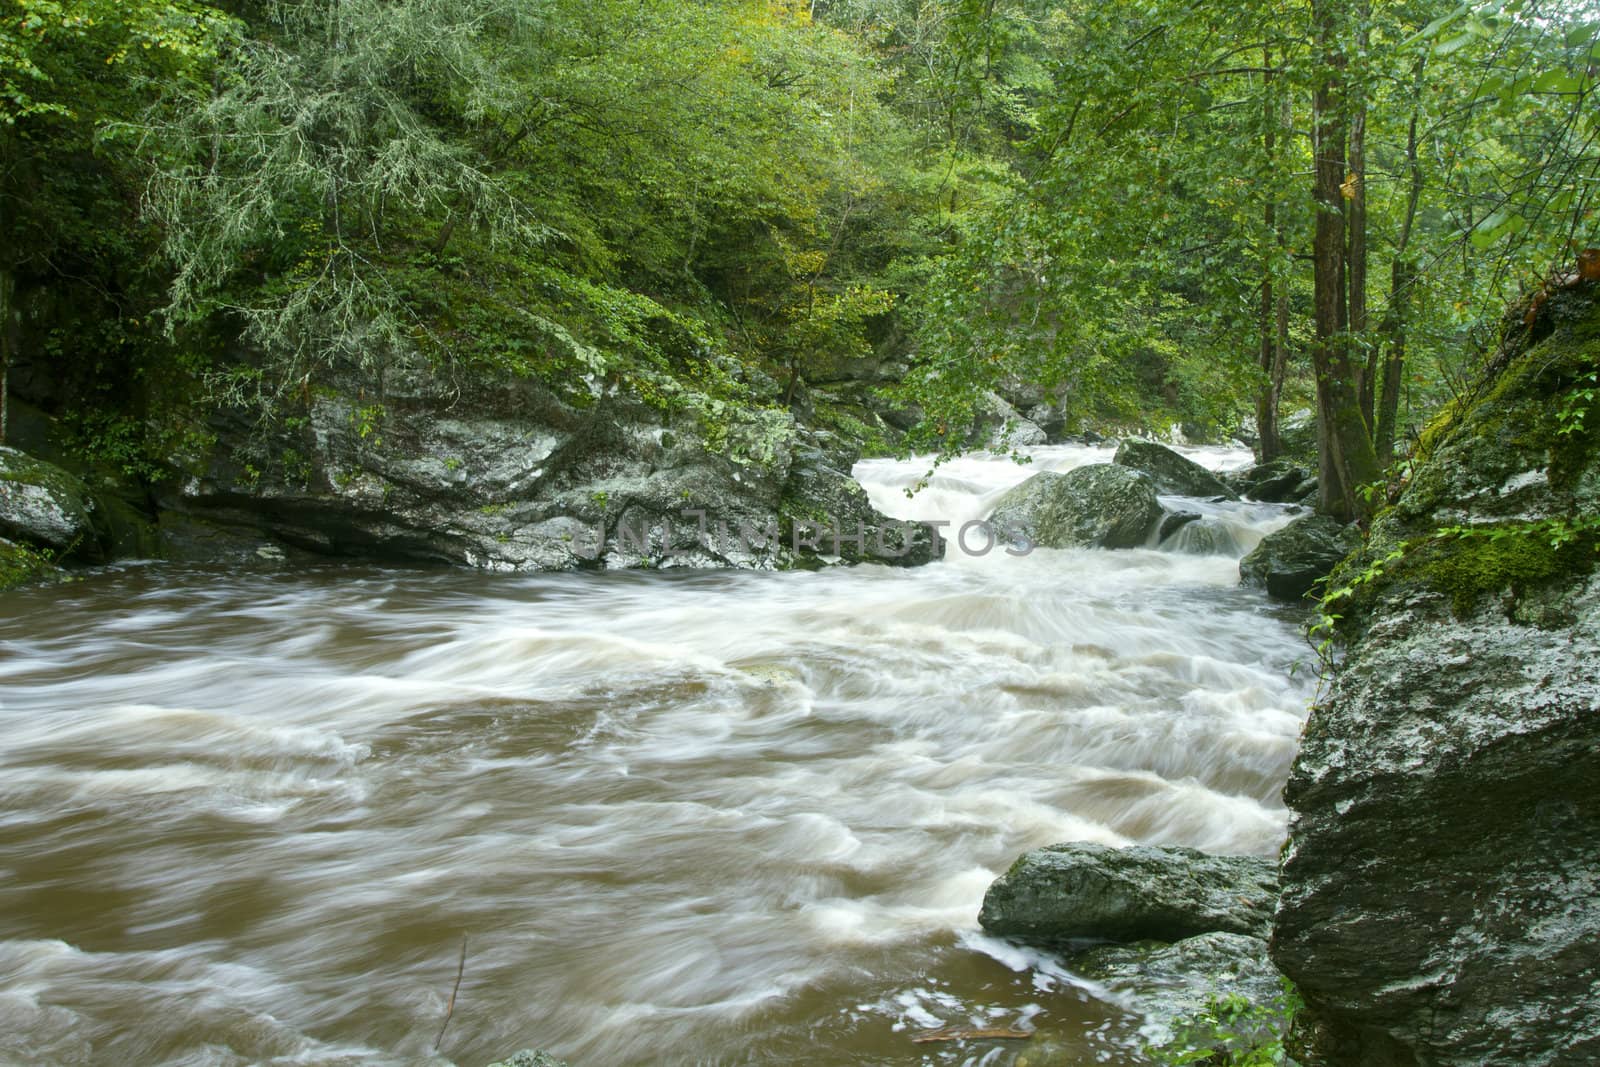 Full, spring flow in stream accented by green leaves and rocks in Great Smoky Mountains National Park